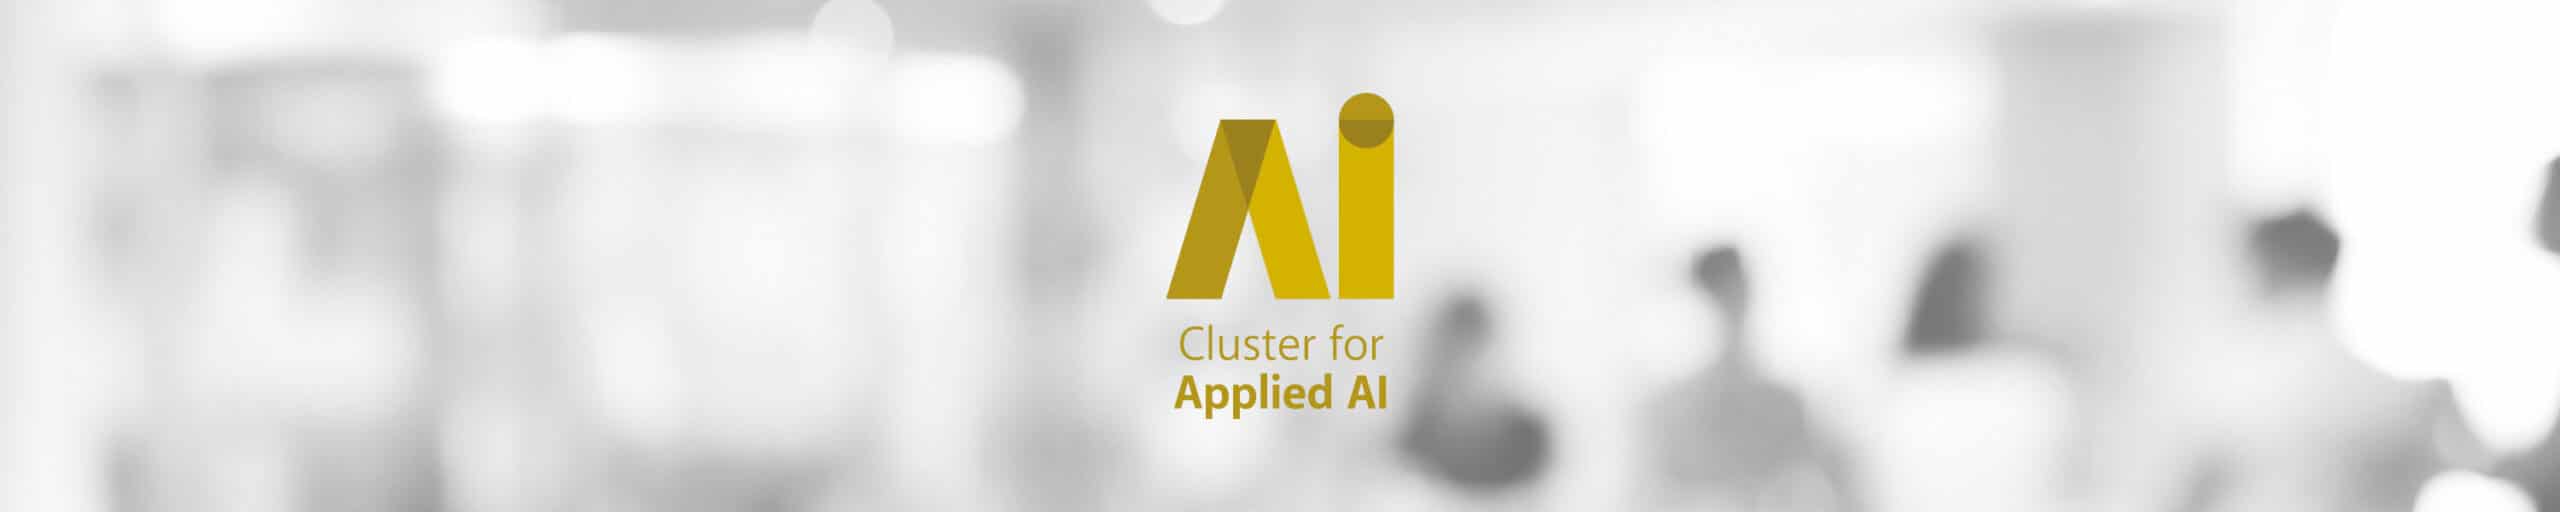 Cluster for Applied Ai background